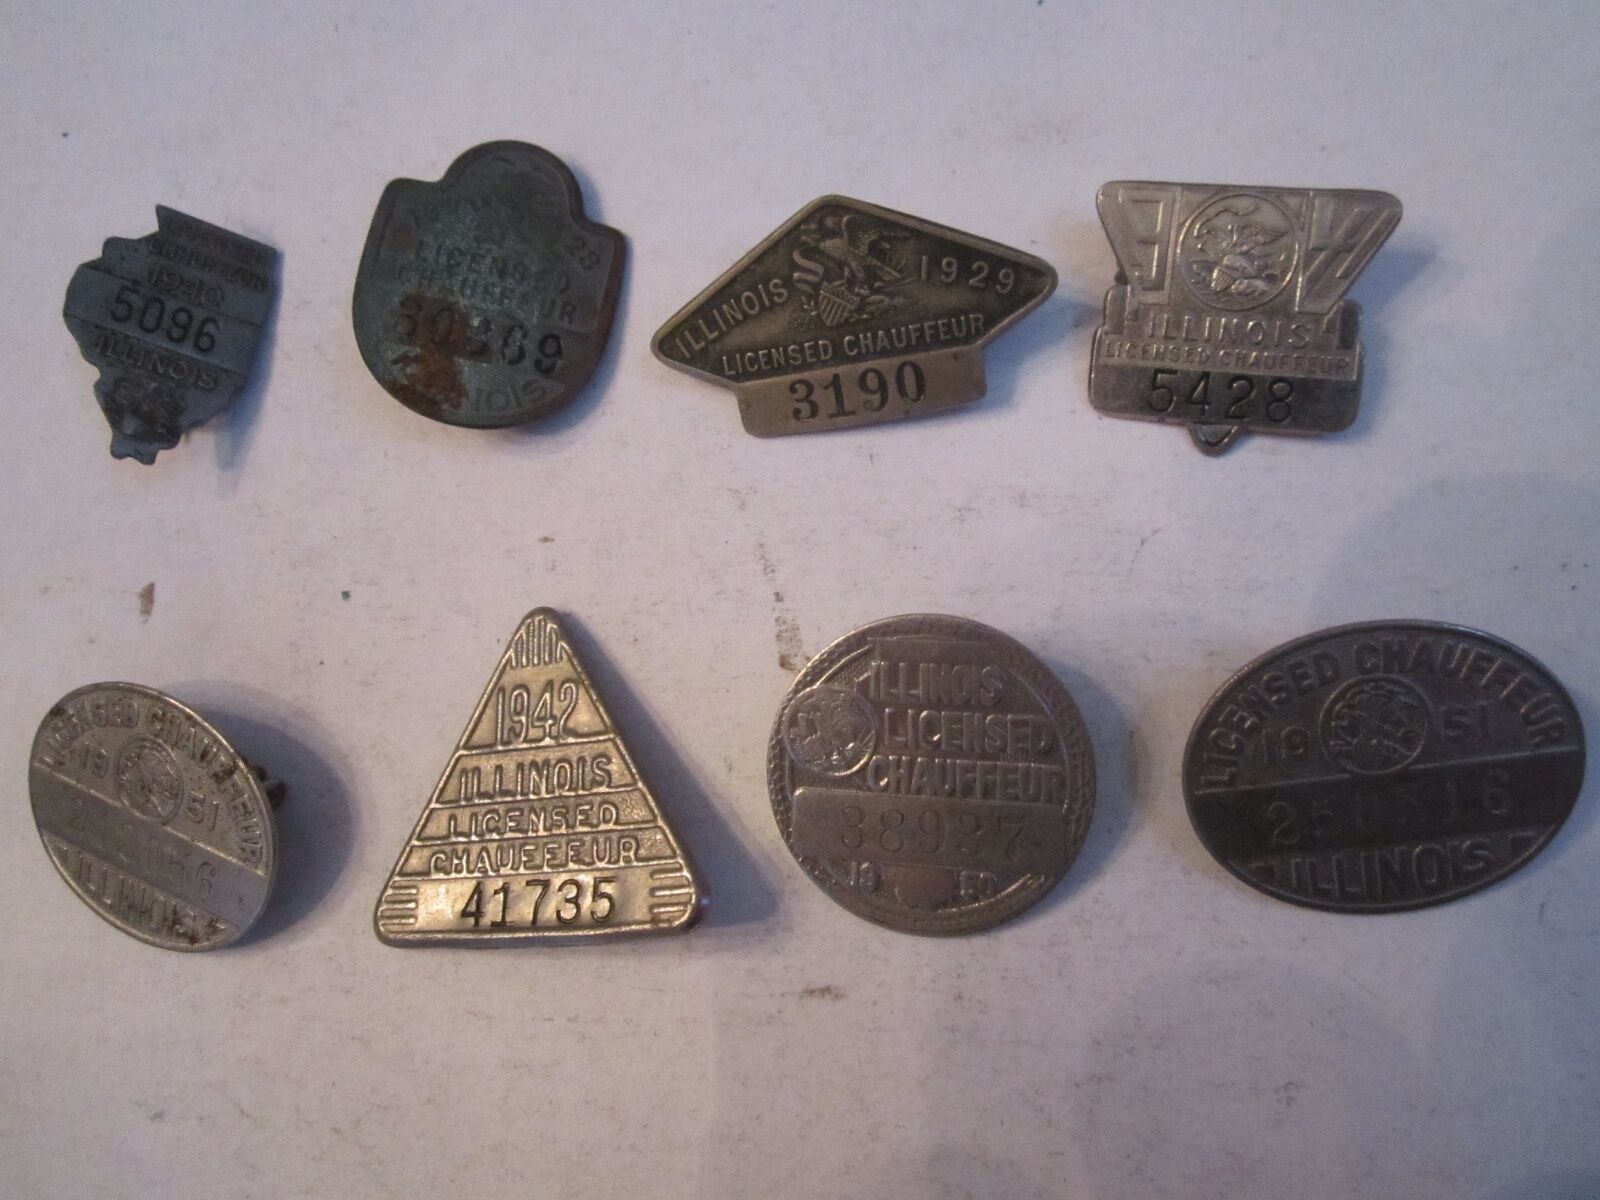 (8) 1920'S-1950'S ILLINOIS CHAUFFEUR LICENSE BADGES - SEE LIST BELOW  